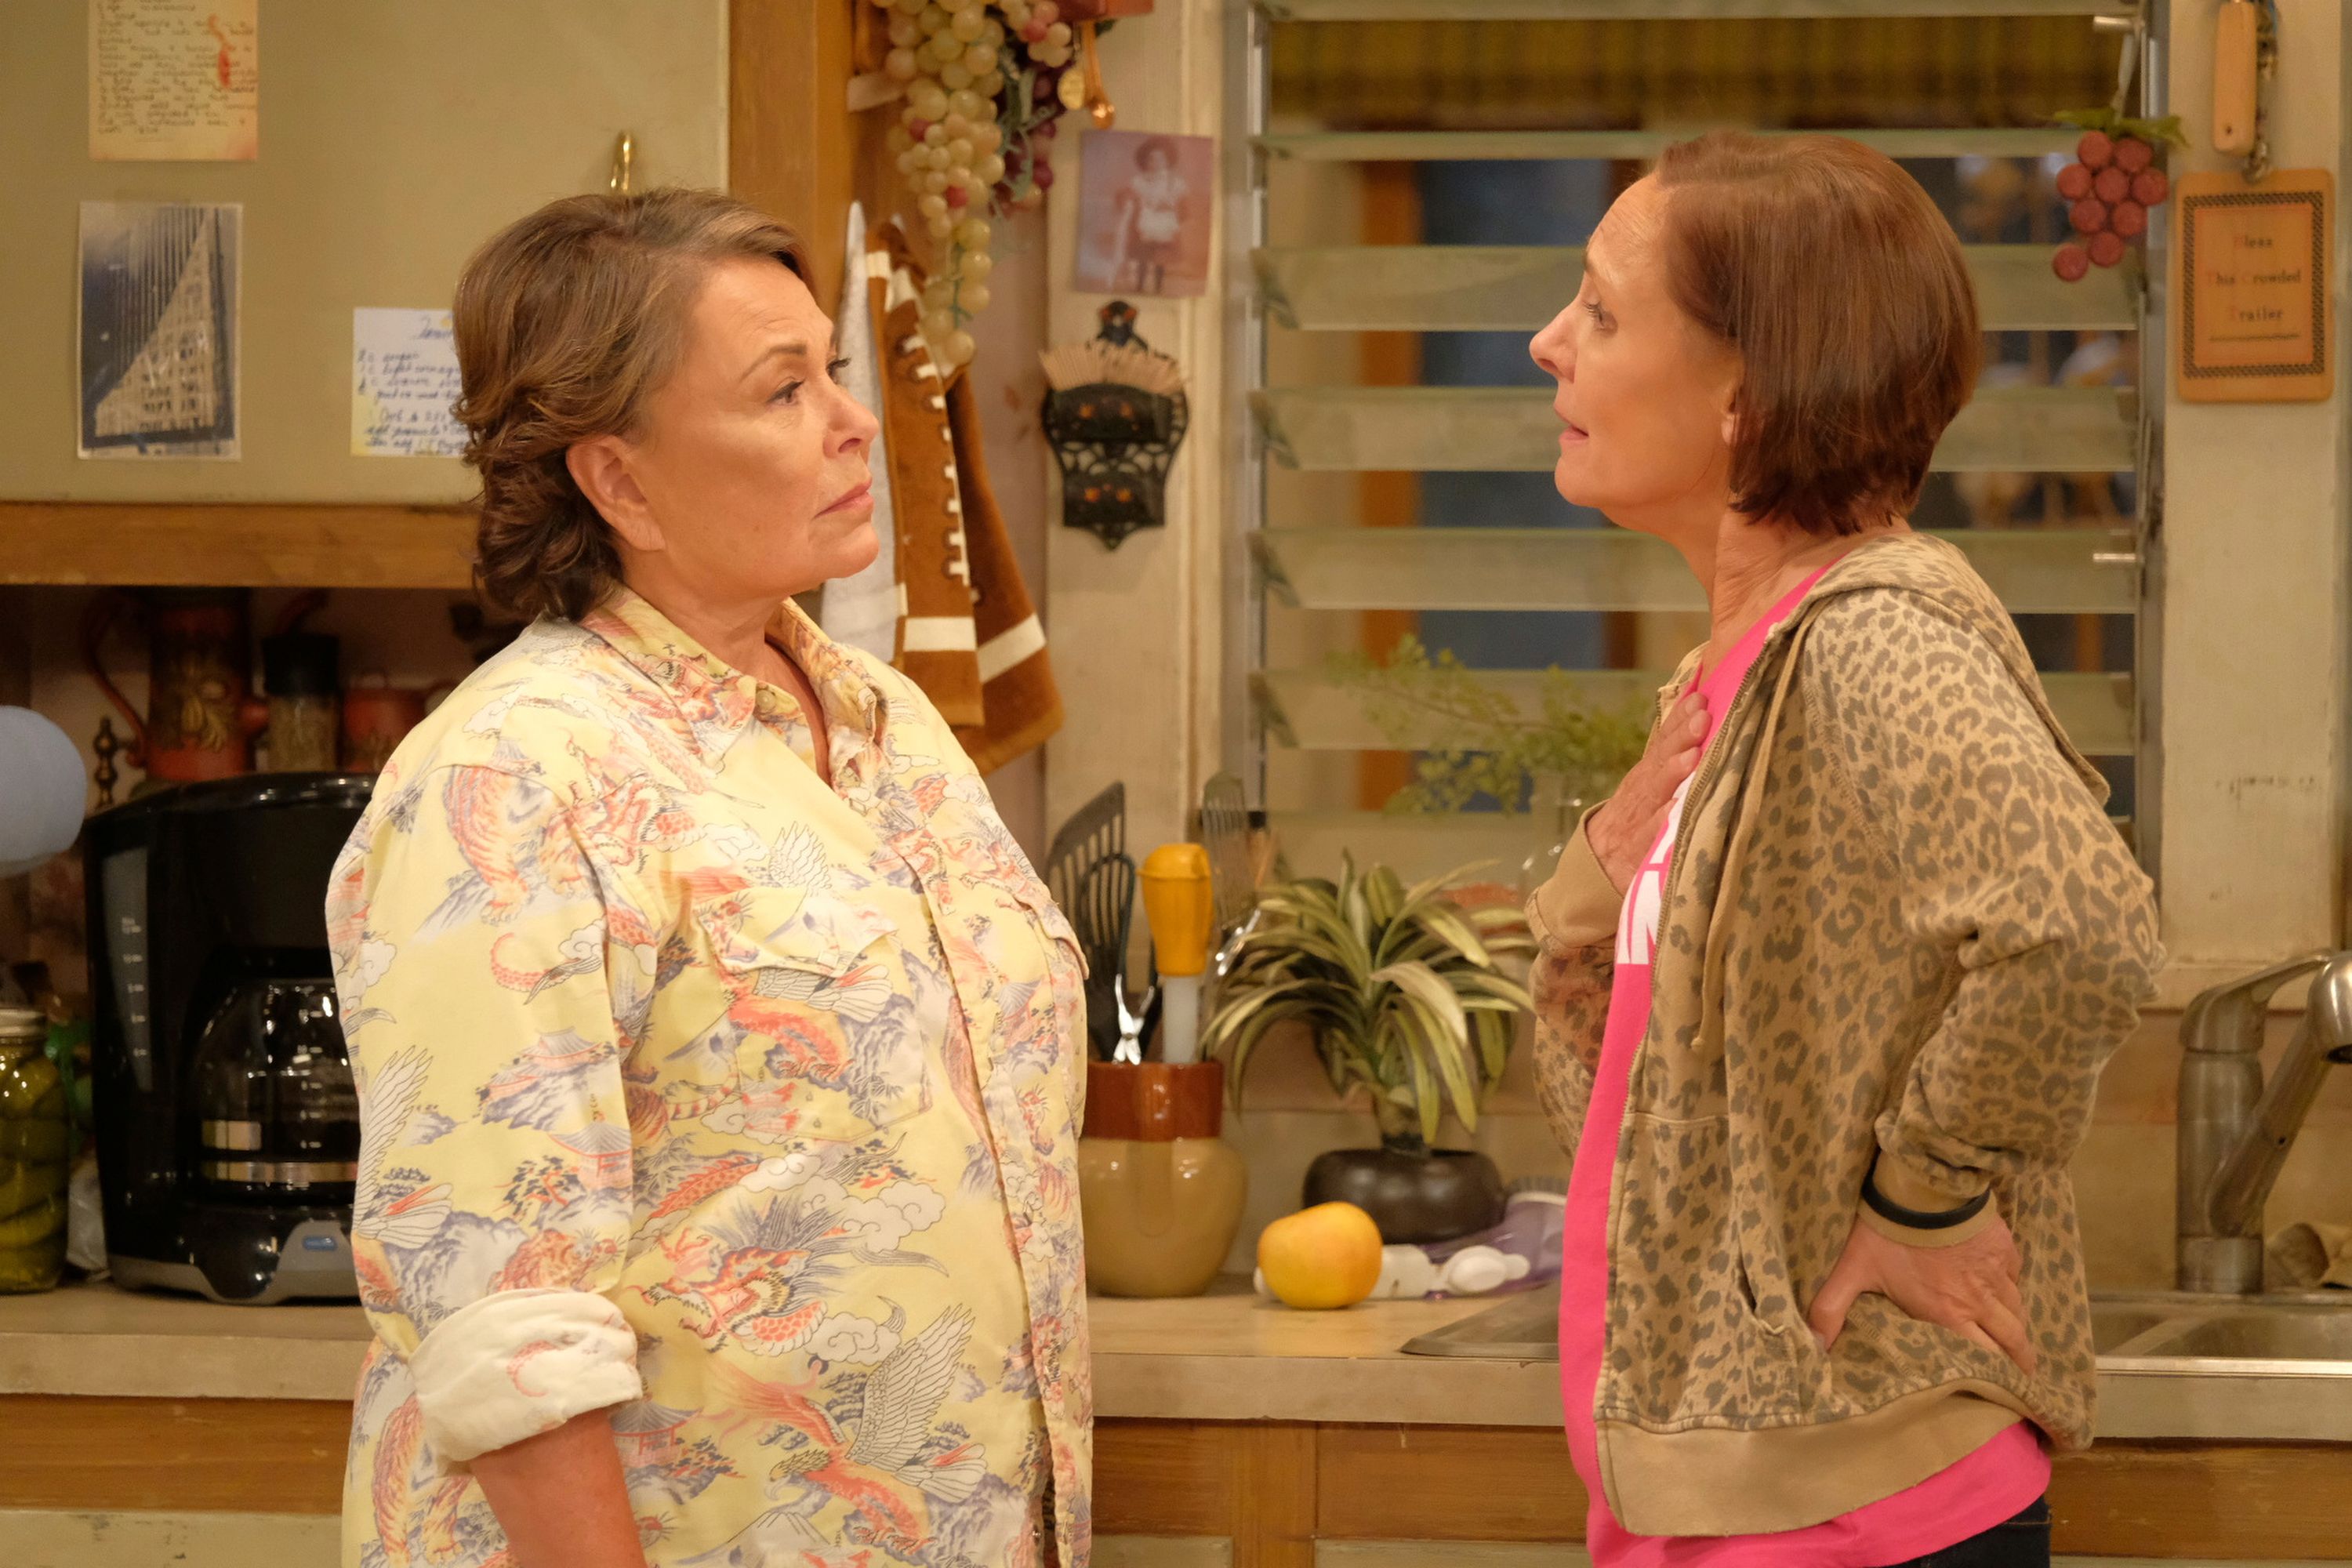 Roseanne Barr Return Possible, But Not With Her Rebooted TV Series